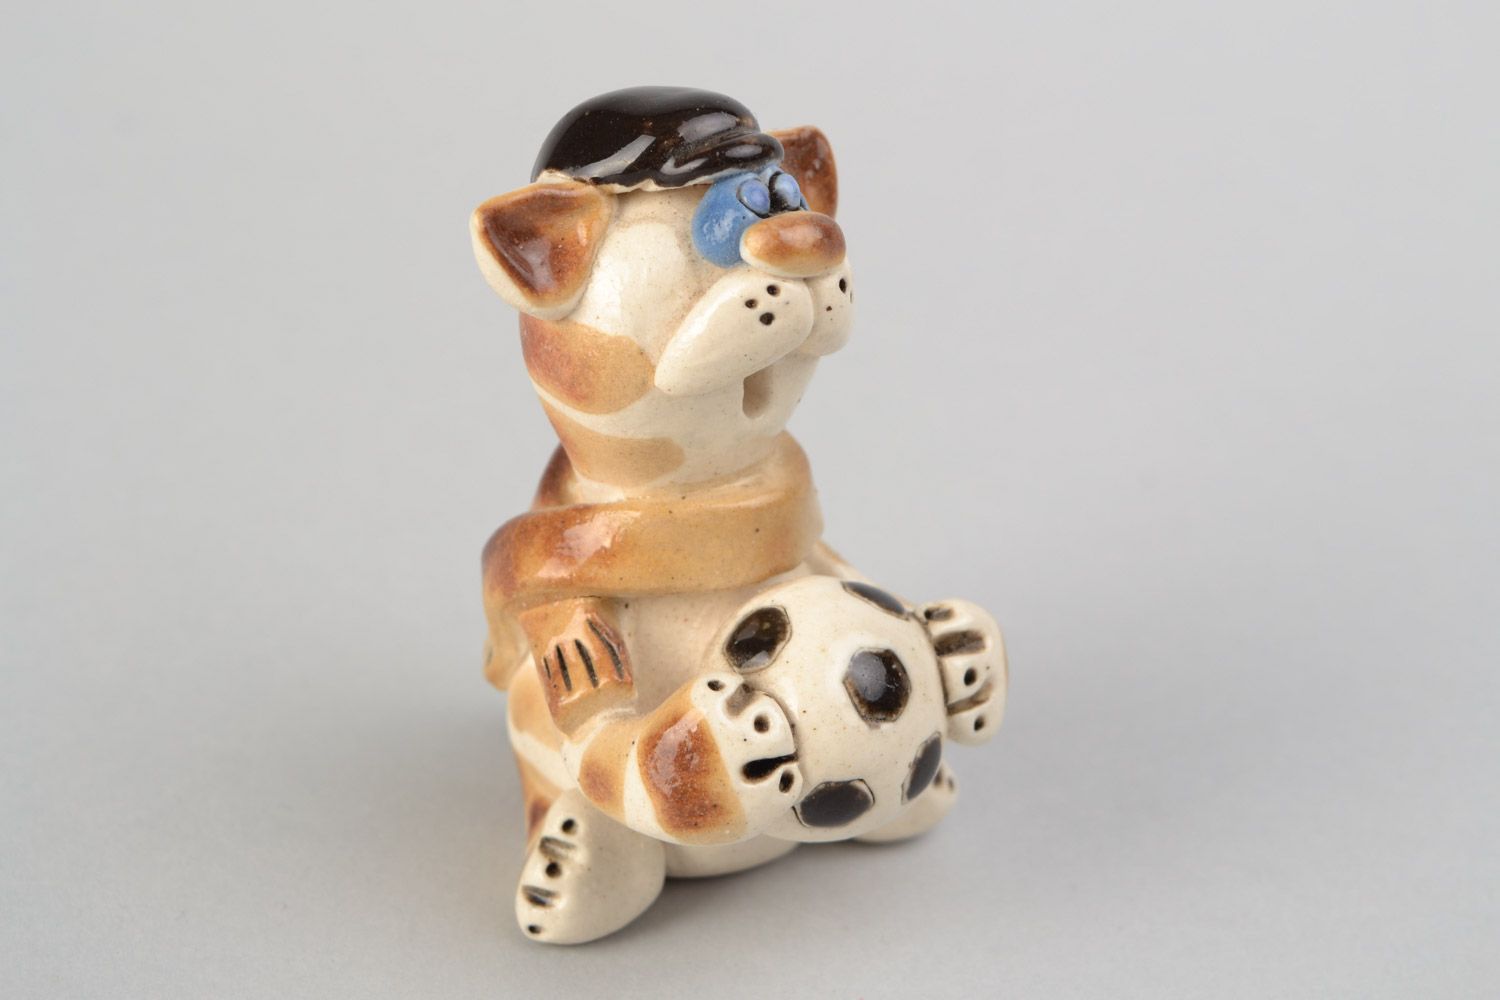 Handmade decorative clay cat figurine with a soccer ball little funny cute statuette photo 1